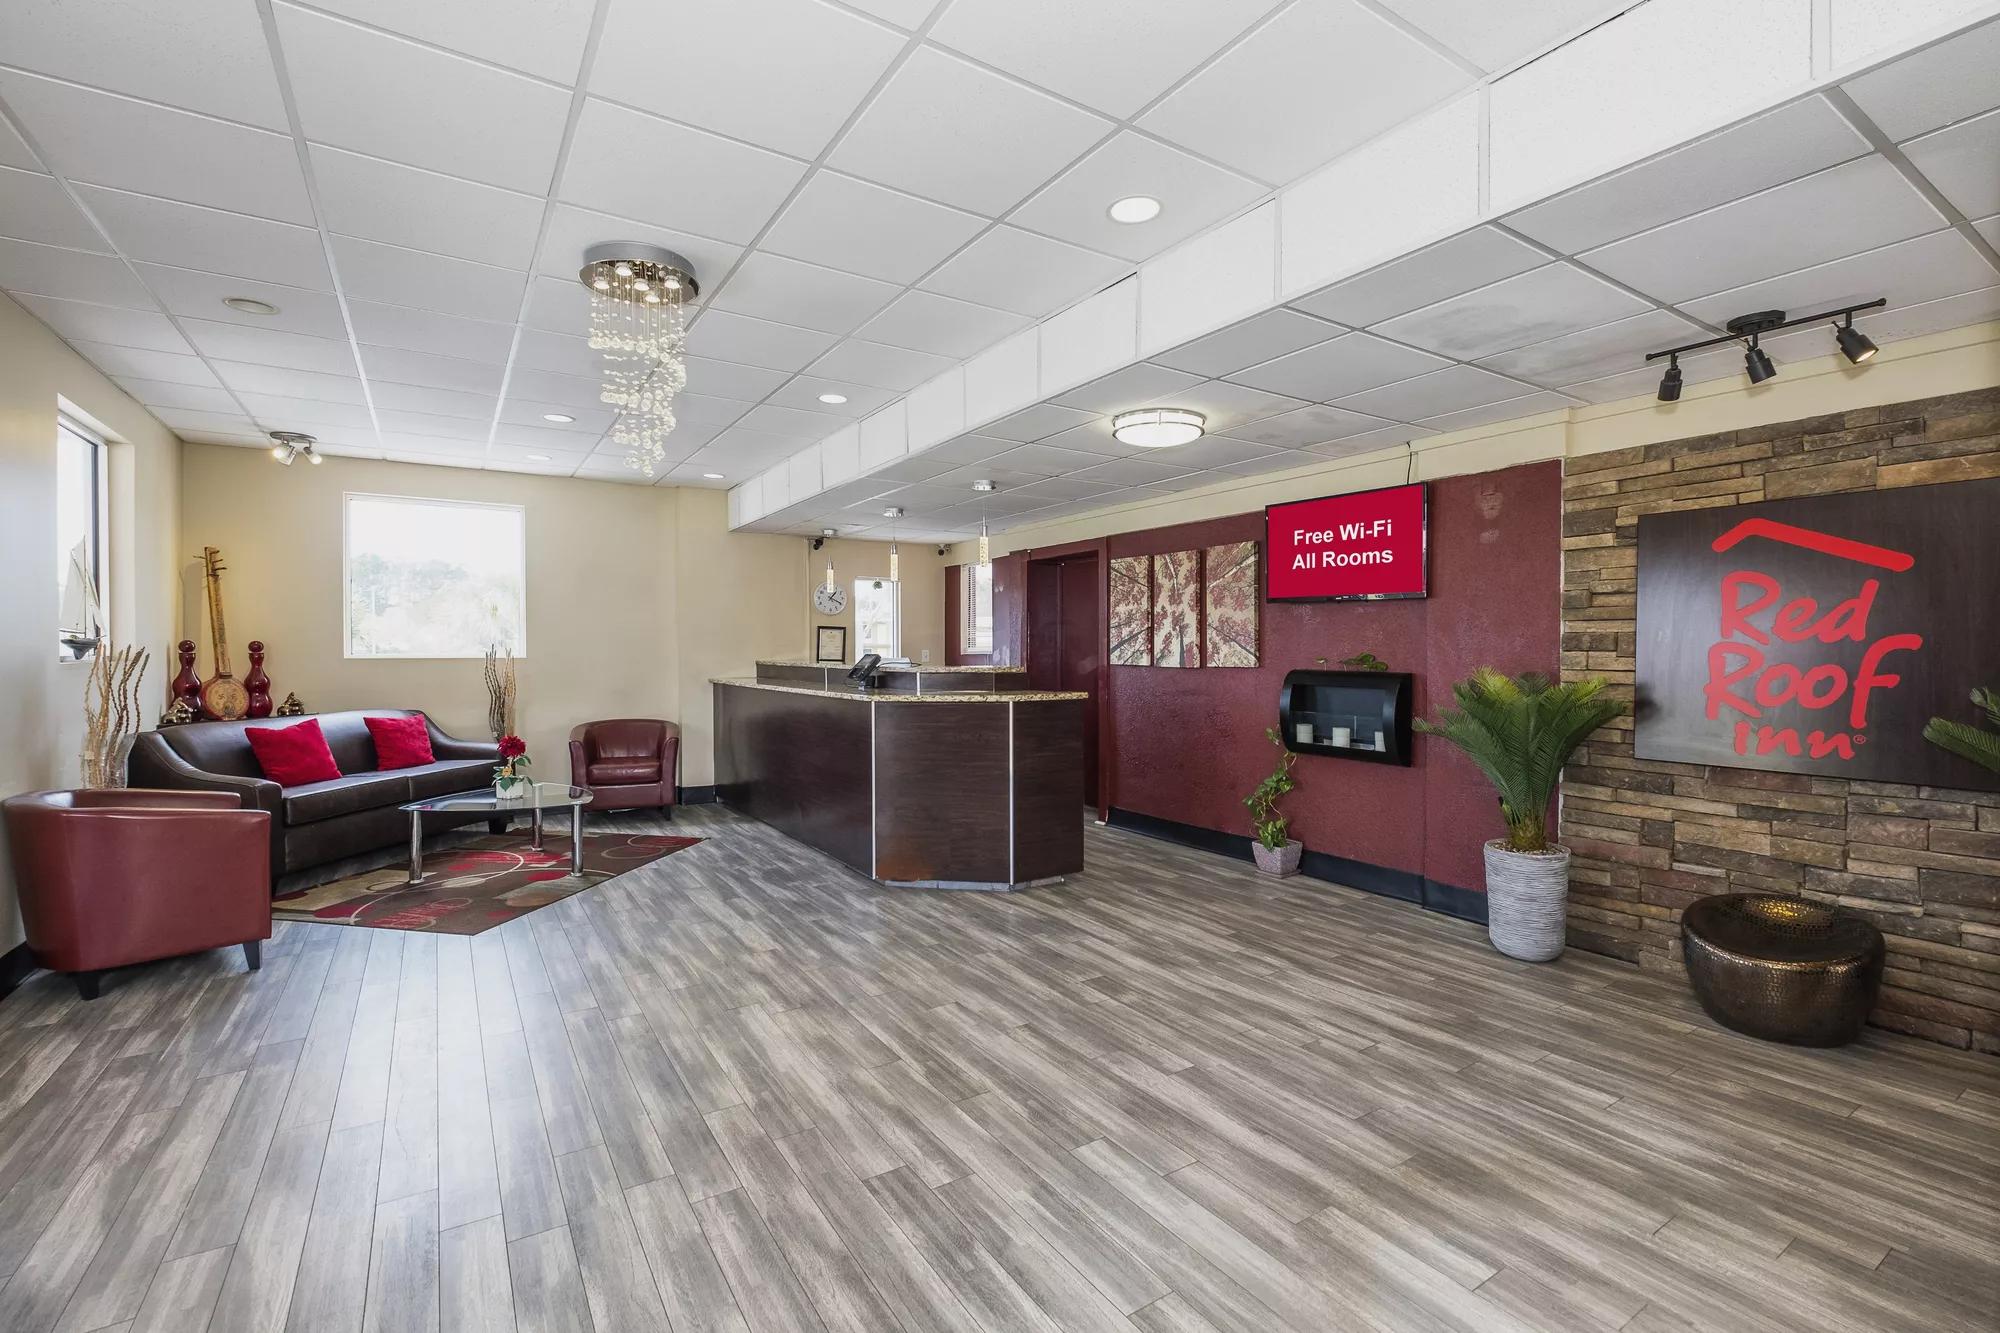 Red Roof Inn Walterboro Front Desk and Lobby Area Image